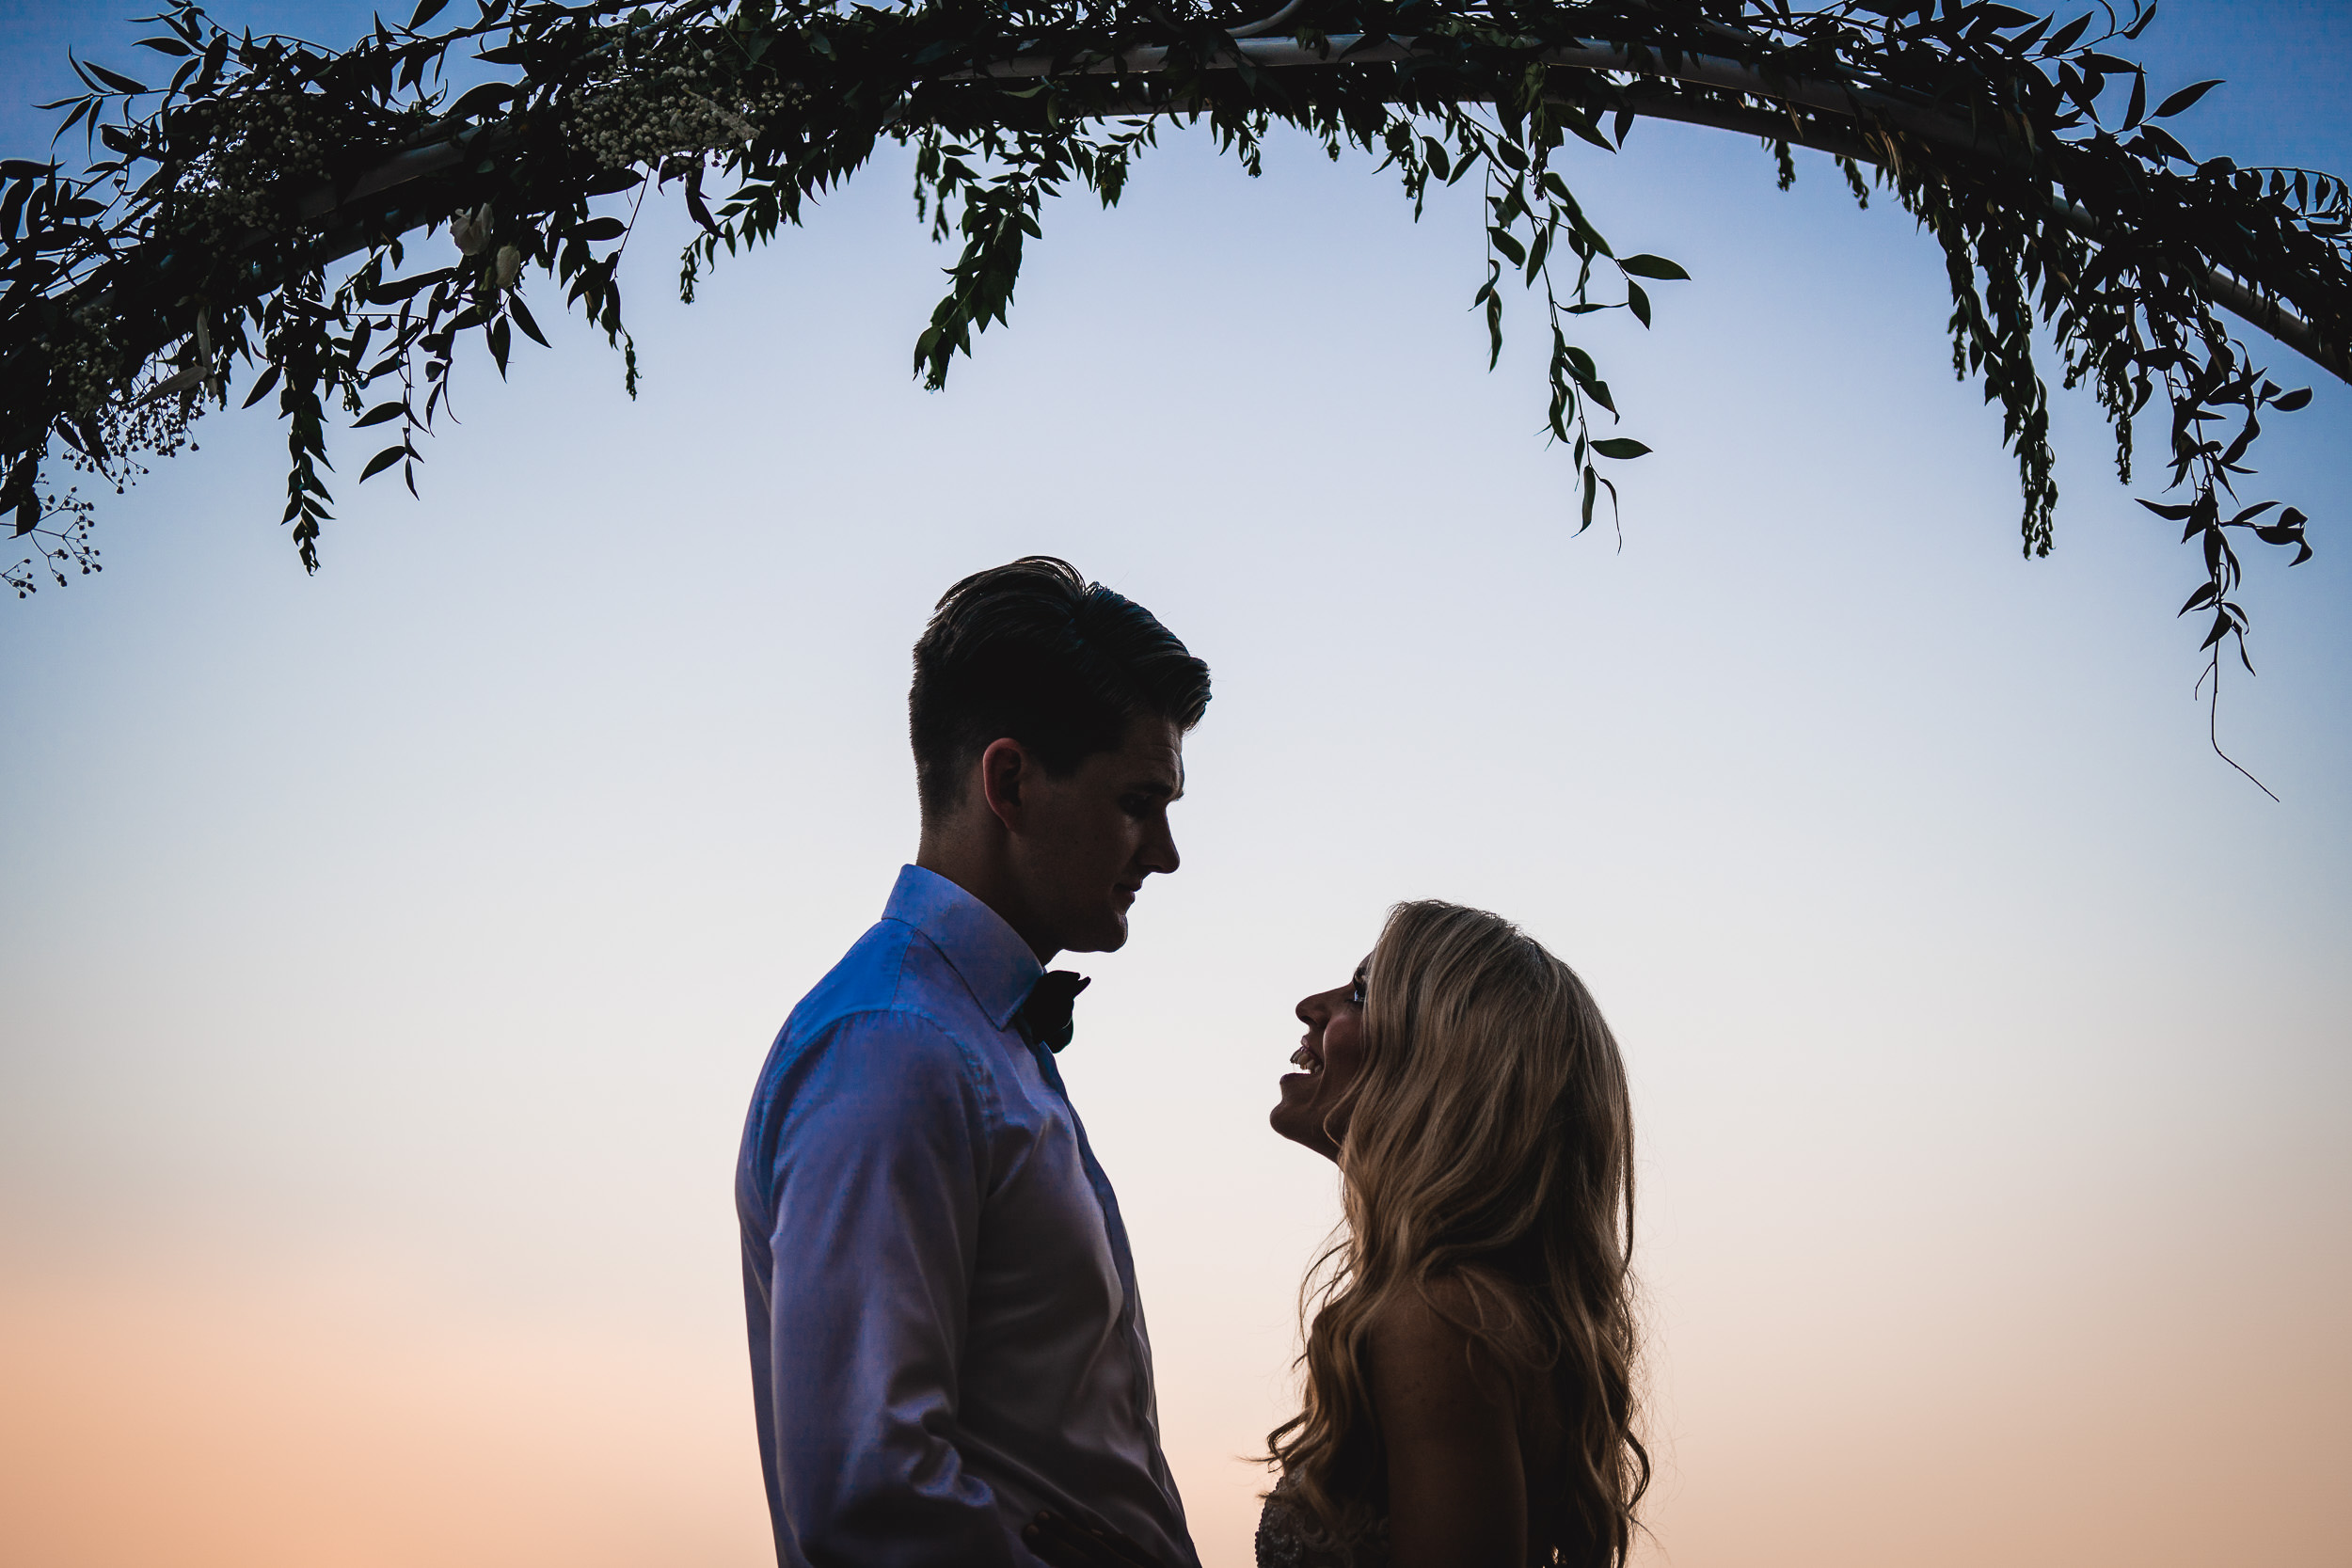 A wedding photo capturing the silhouette of a bride and groom standing under an arch at sunset.